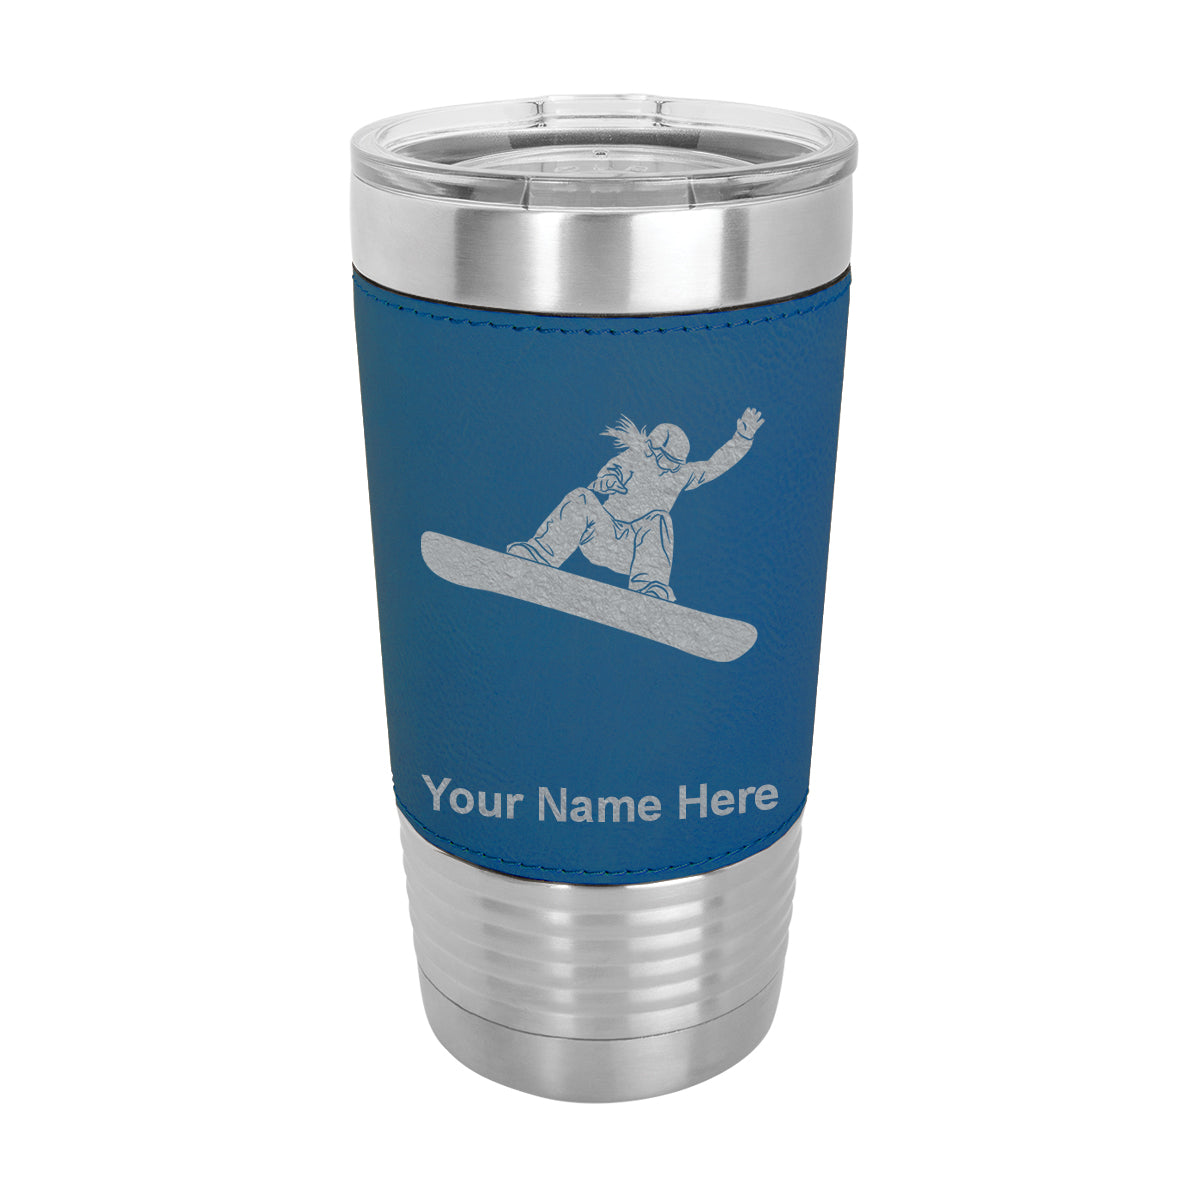 20oz Faux Leather Tumbler Mug, Snowboarder Woman, Personalized Engraving Included - LaserGram Custom Engraved Gifts